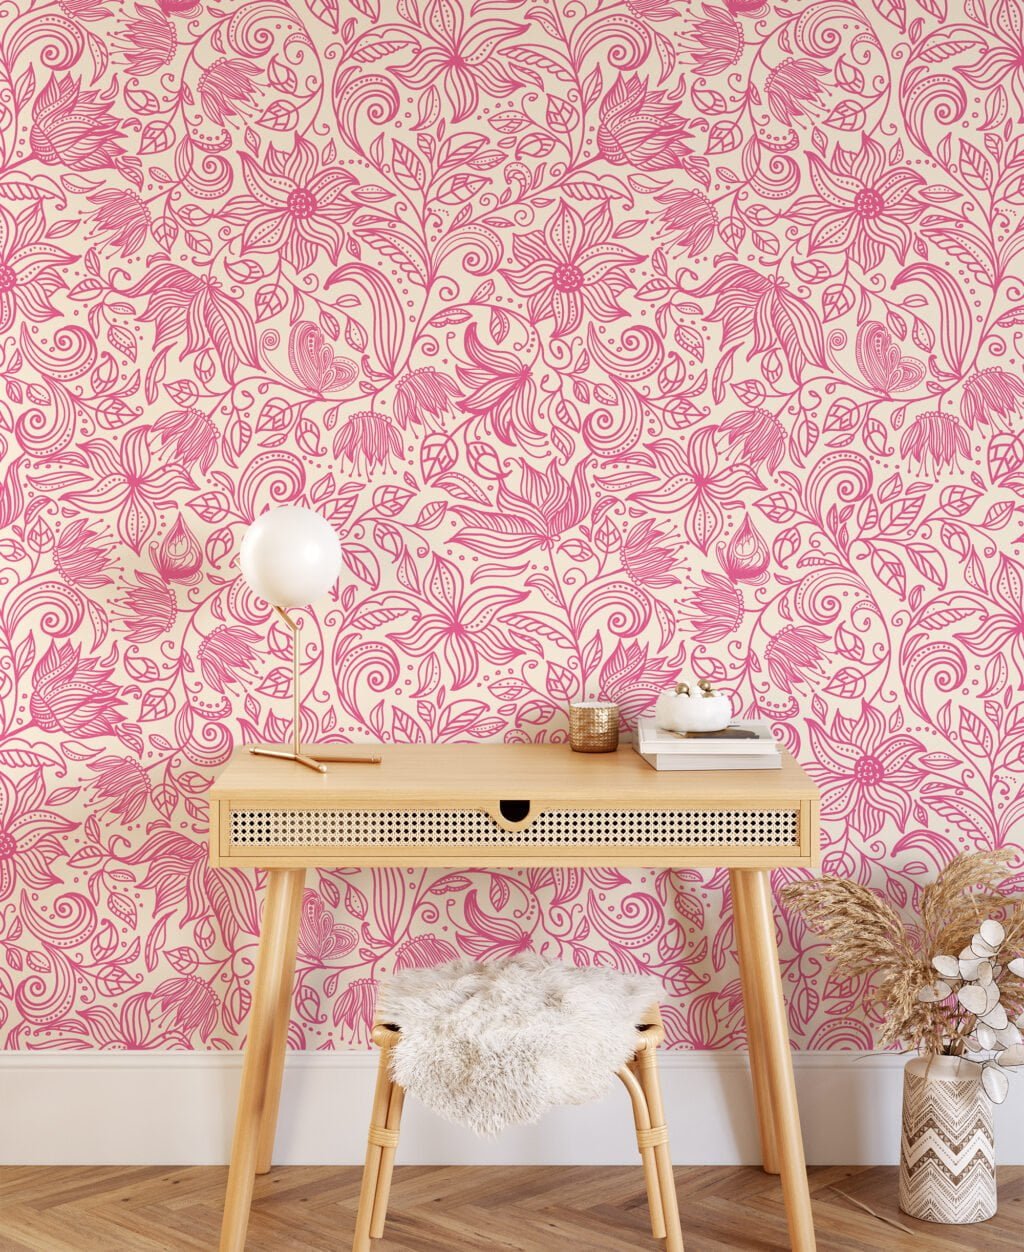 Pink Floral Line Art Paisley Pattern Wallpaper, Elegant Swirls and Blossoms Peel & Stick Wall Mural